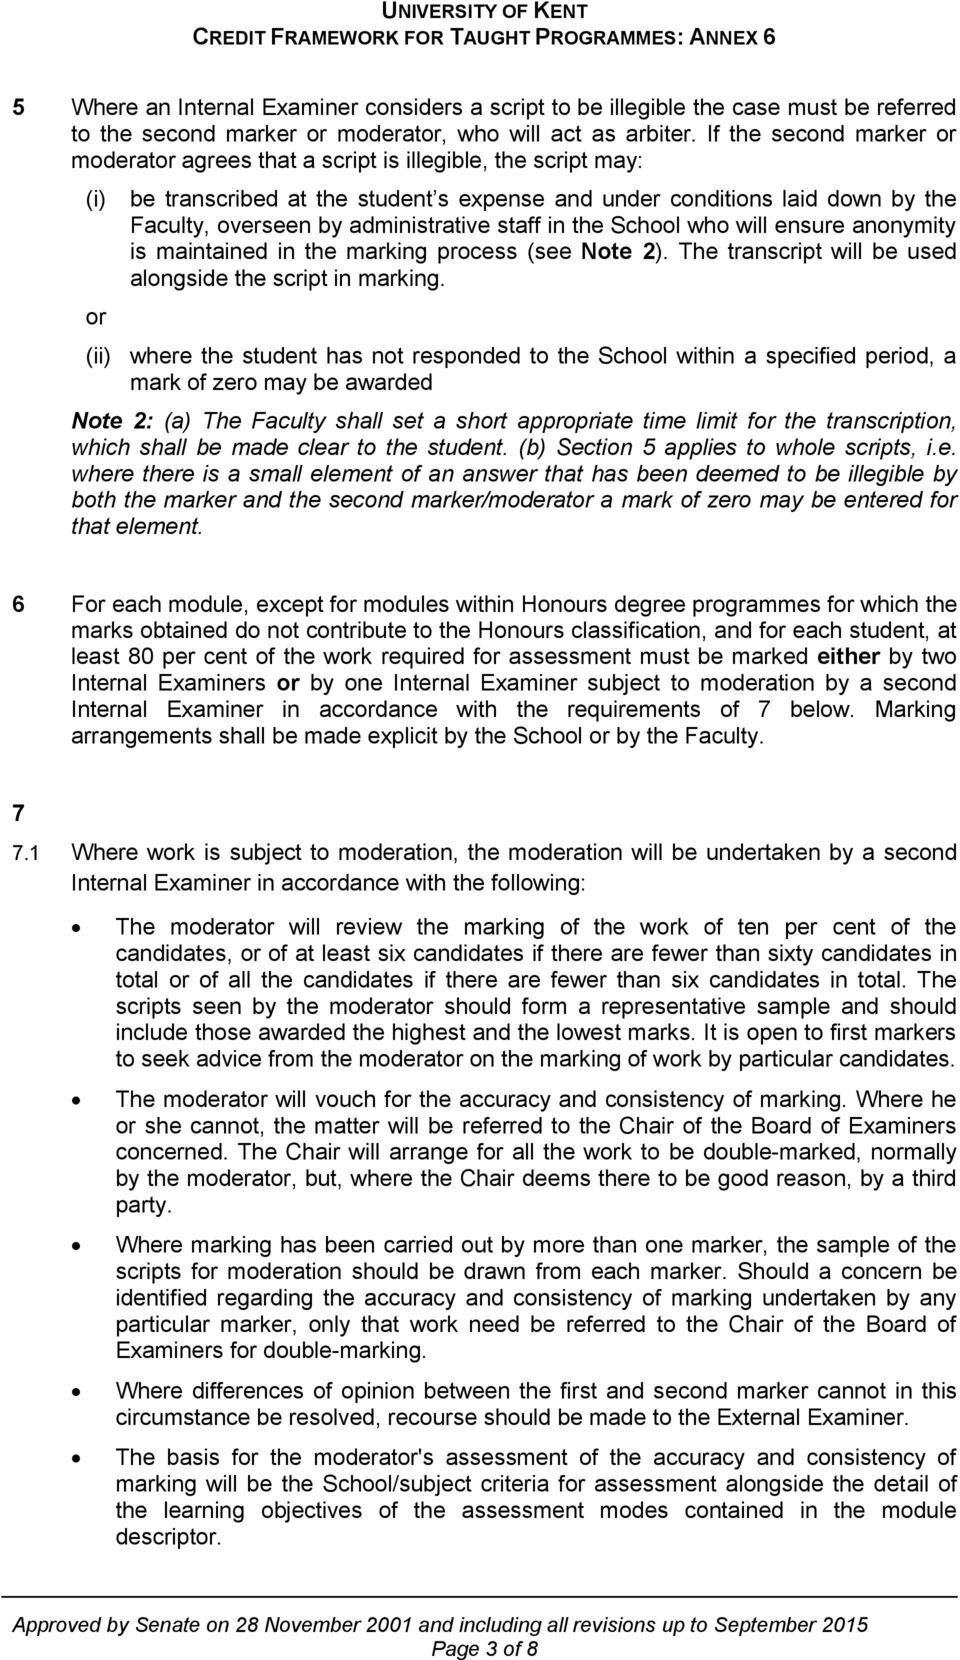 administrative staff in the School who will ensure anonymity is maintained in the marking process (see Note 2). The transcript will be used alongside the script in marking.